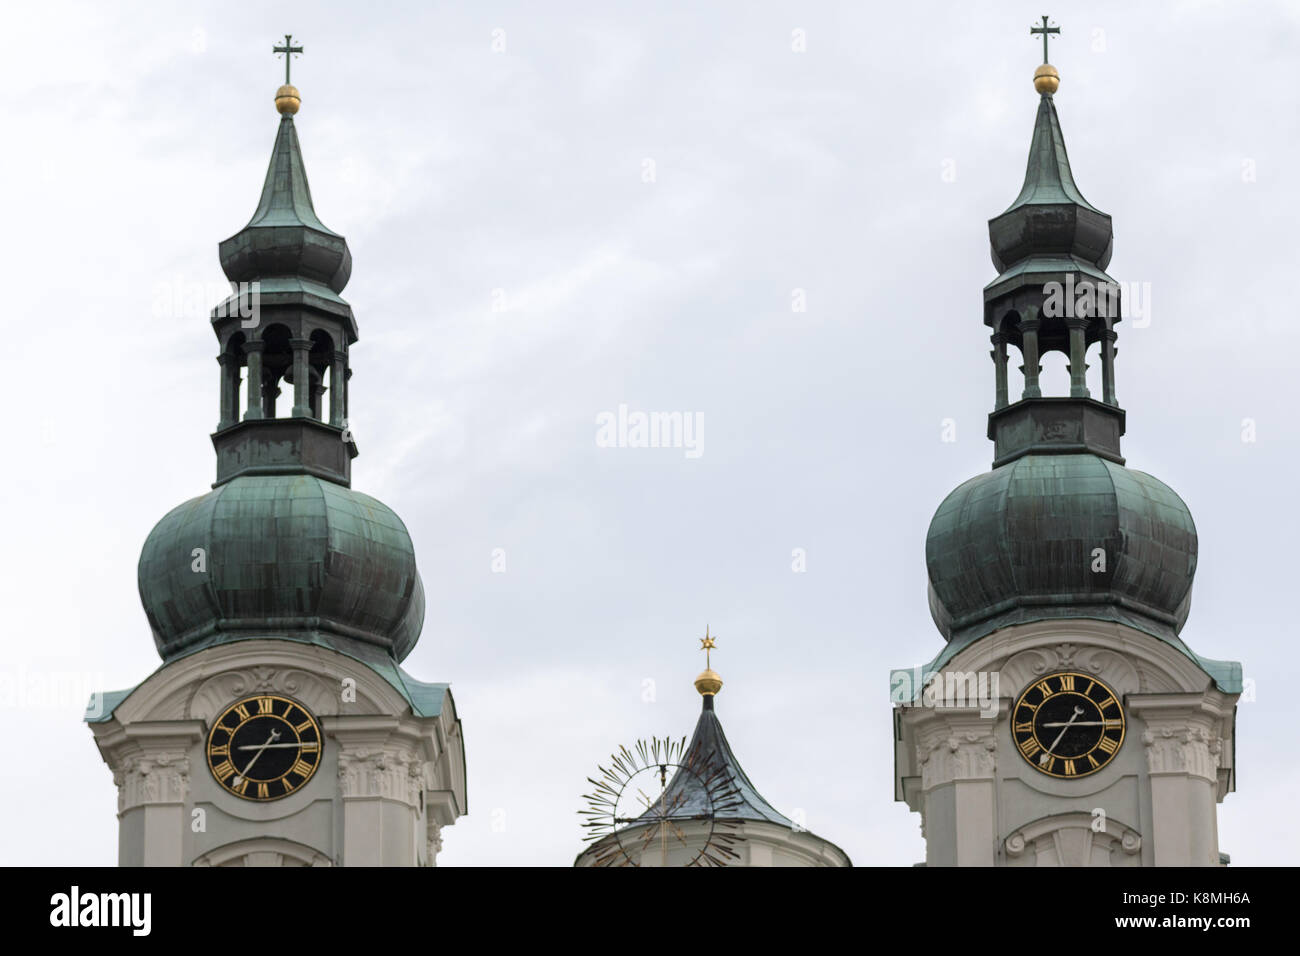 Karlovy Vary, Czech Republic - August 15, 2017:Bells of the Mary Magdalene Church in the historic center of the city Stock Photo